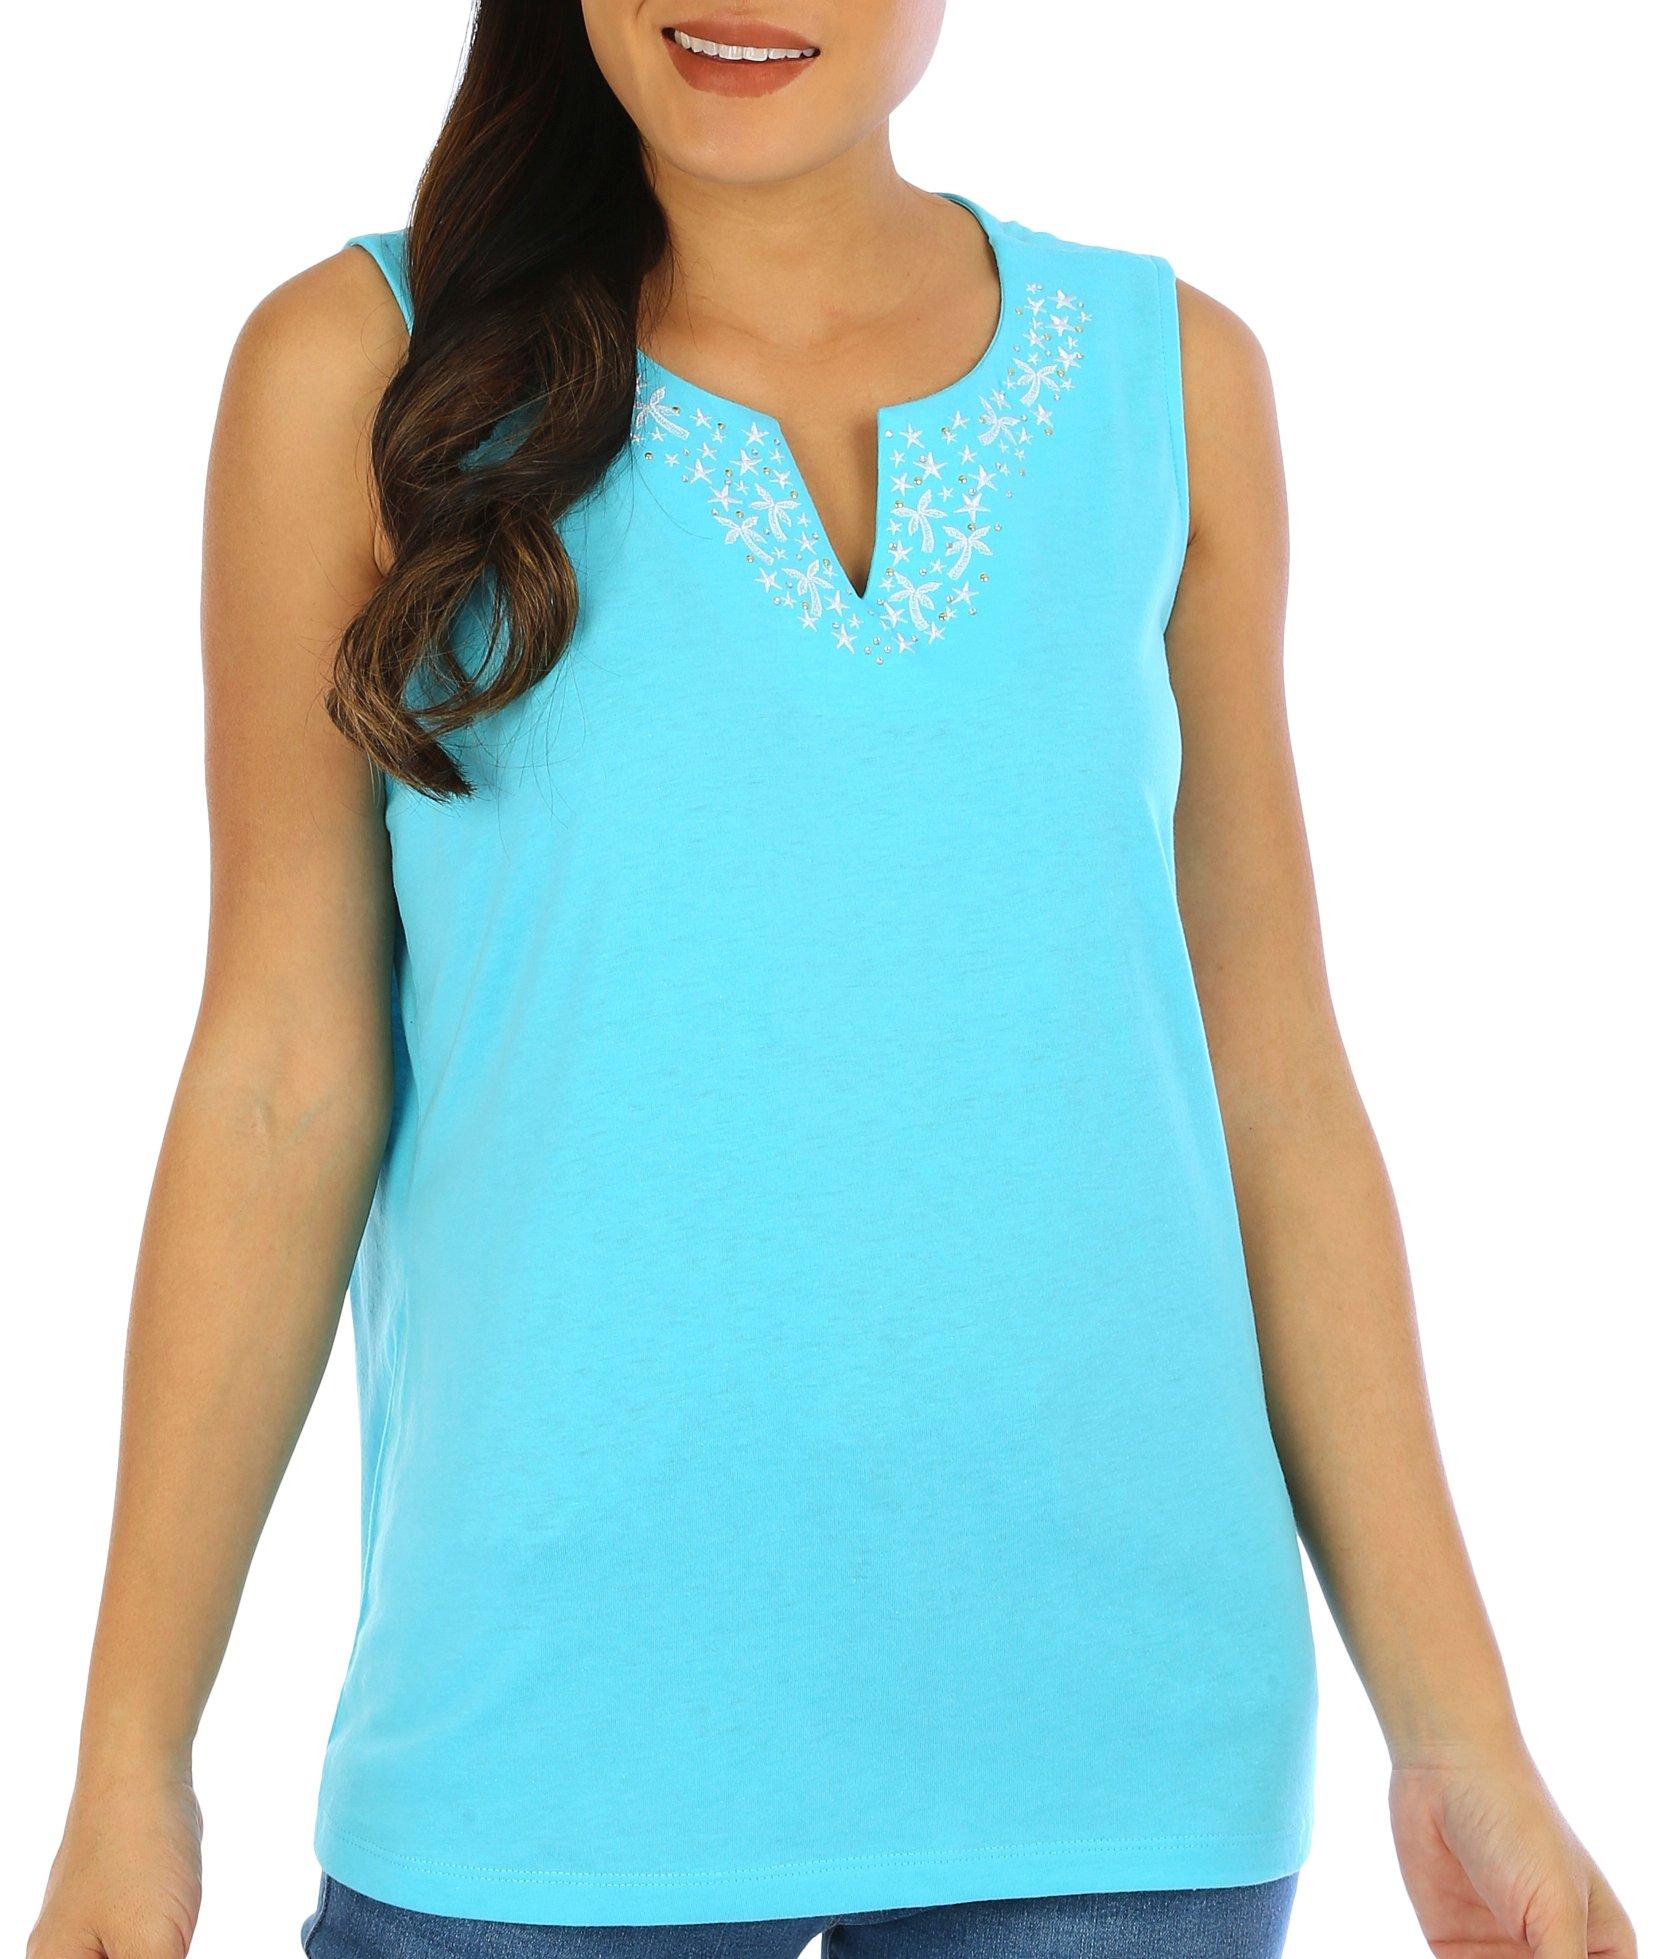 Coral Bay Womens Sleeveless Embroidered Notch Neckline Top